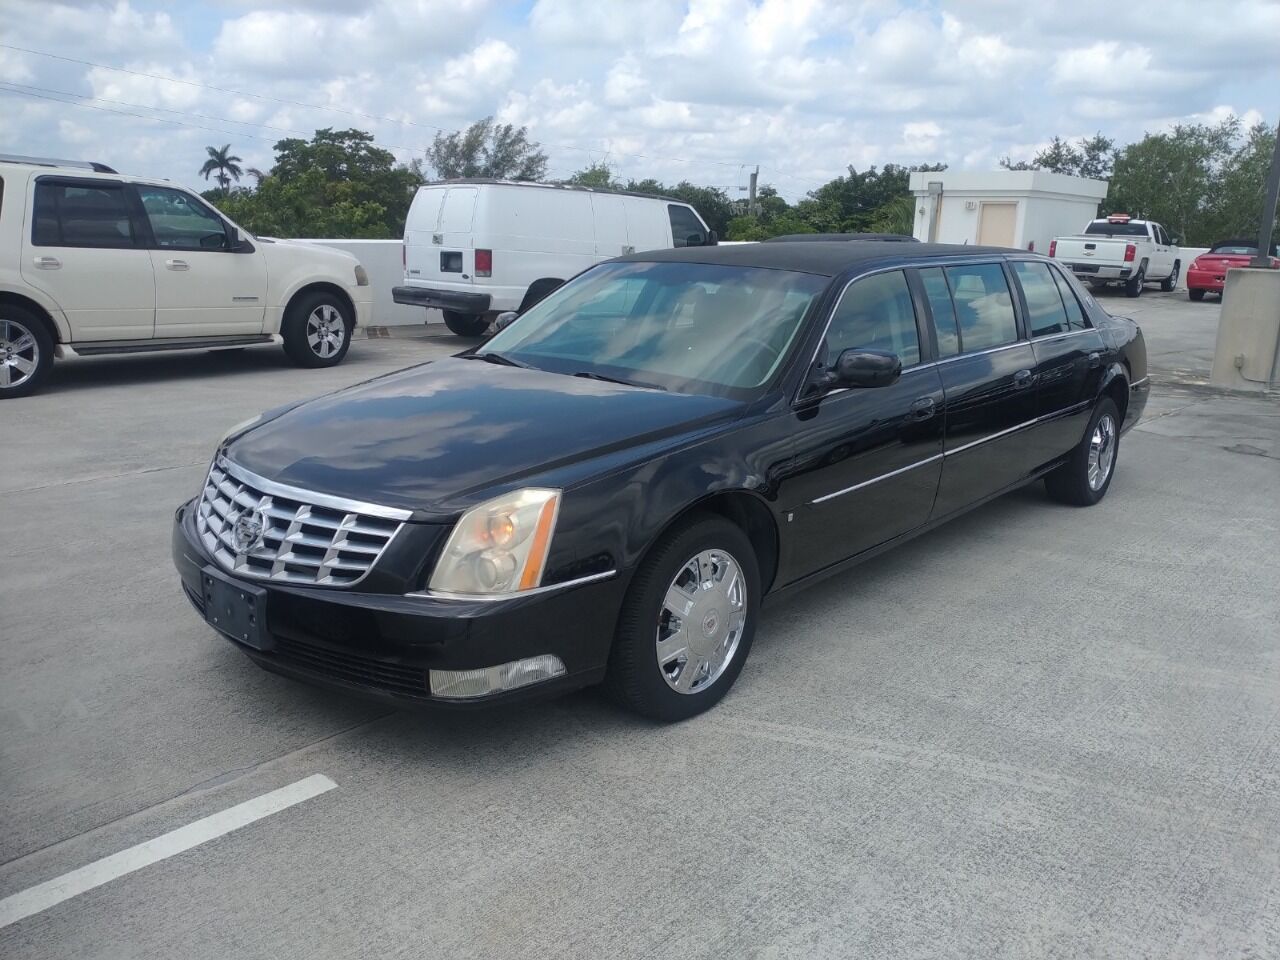 2008 Cadillac Limousine Professional Chassis Incomplete - $11,950